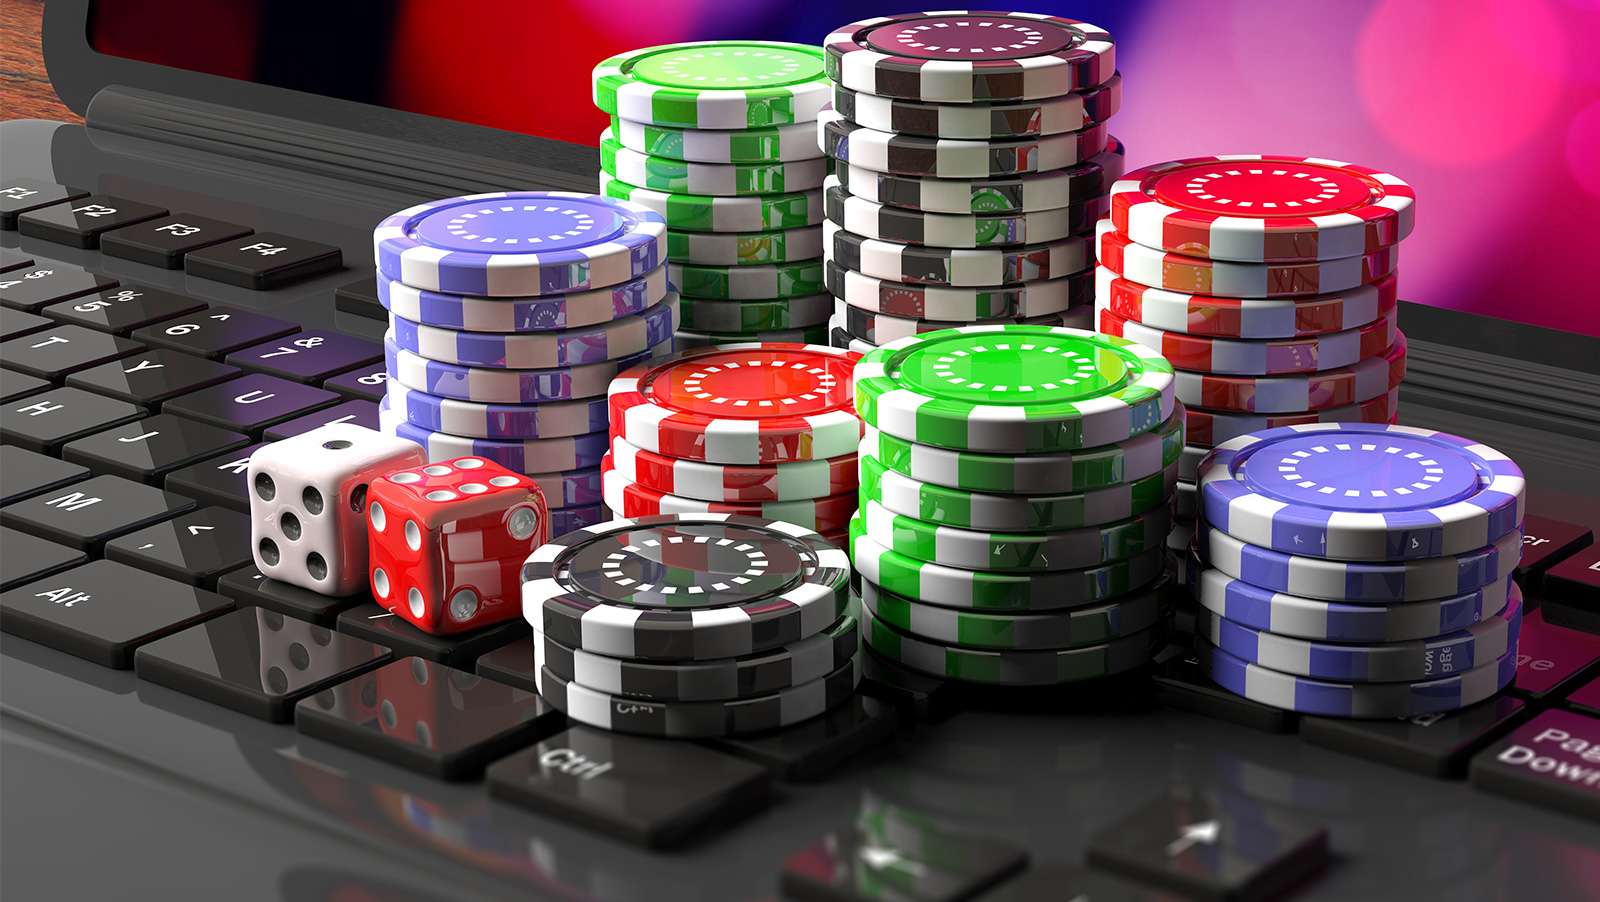 Maryland Lawmaker Urges Education on Gambling Risks for High School Students